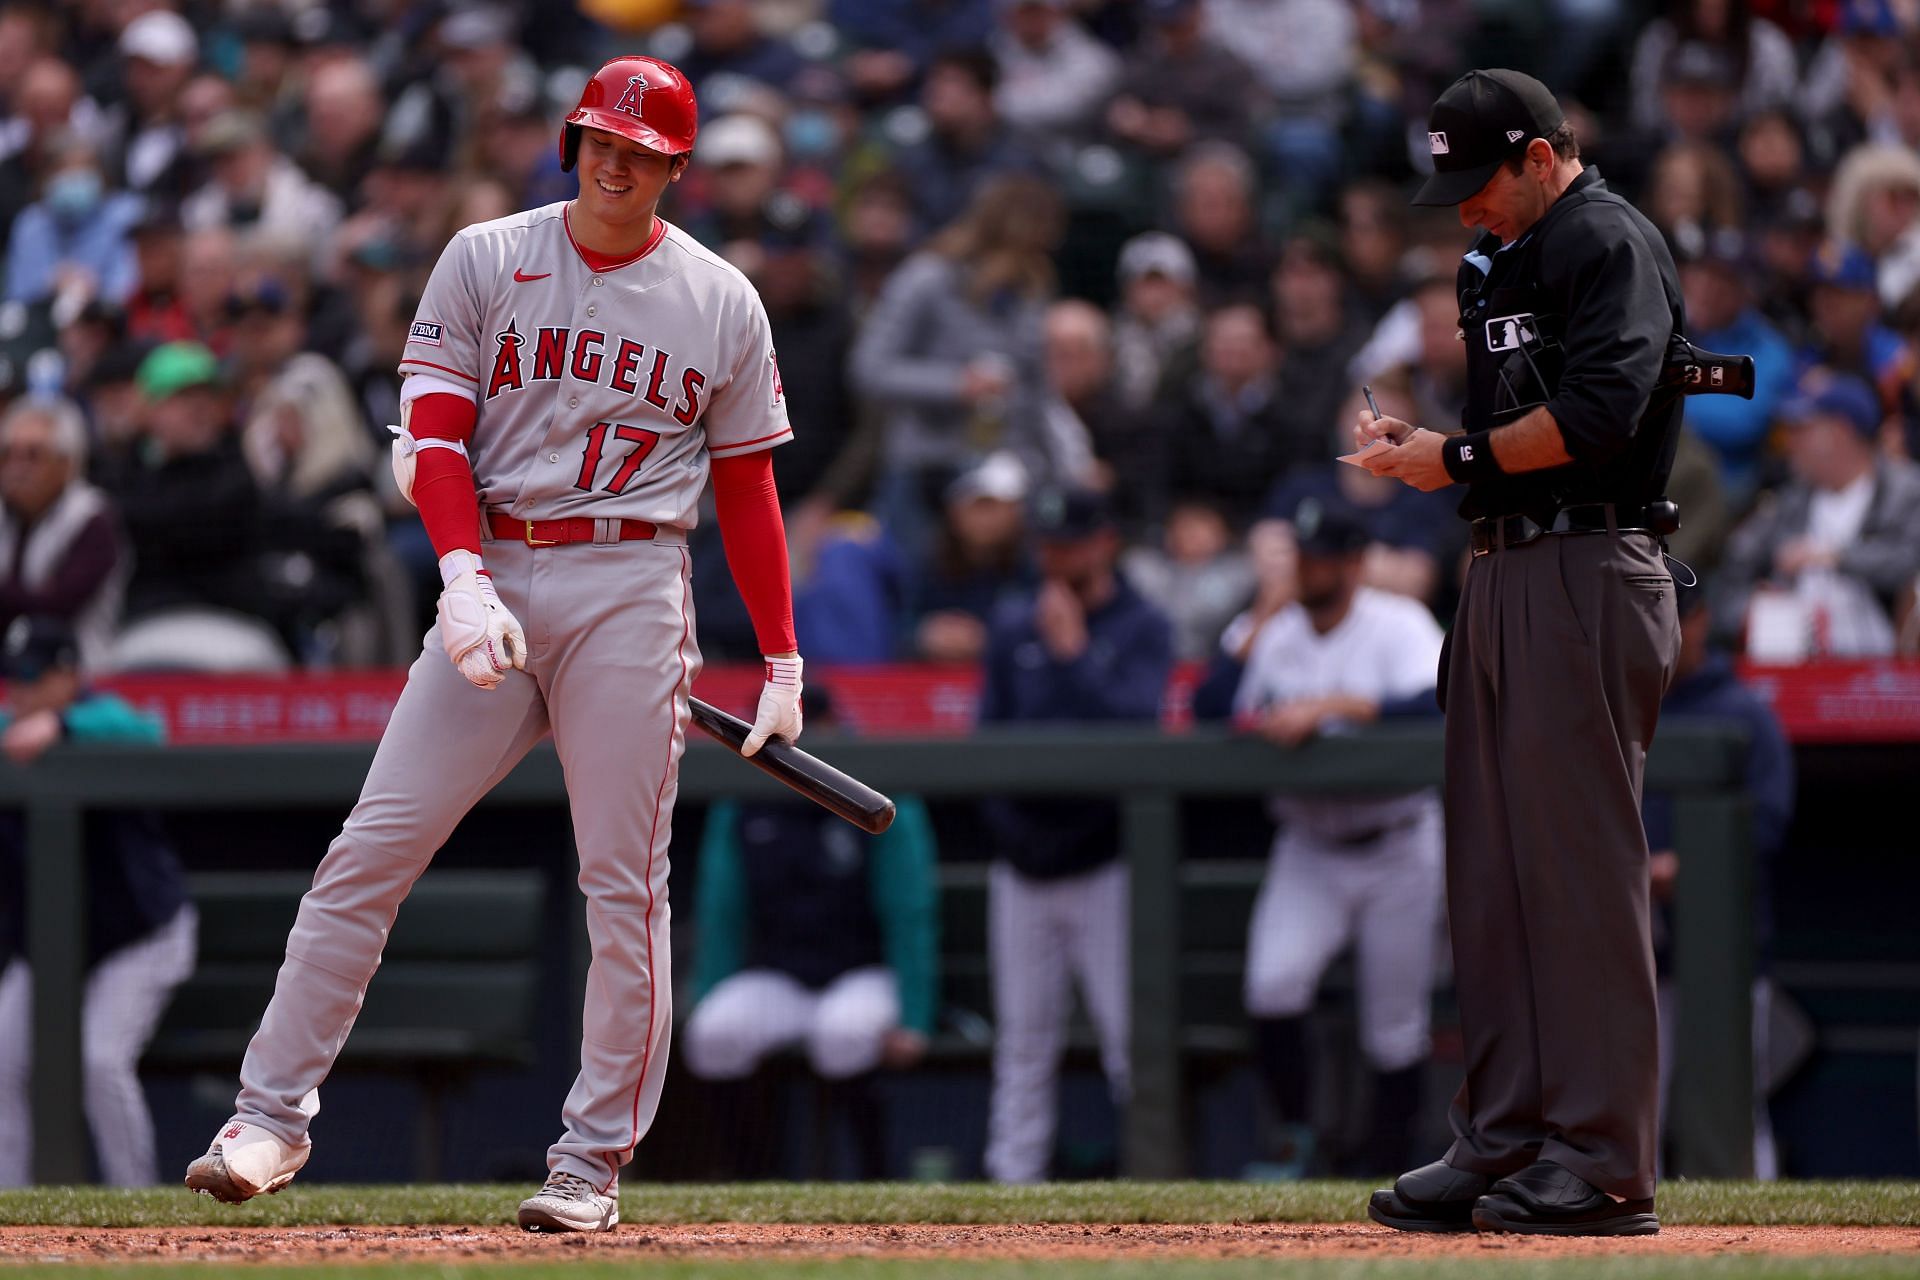 From Batting to Pitching: Exploring the Shohei Ohtani Stats